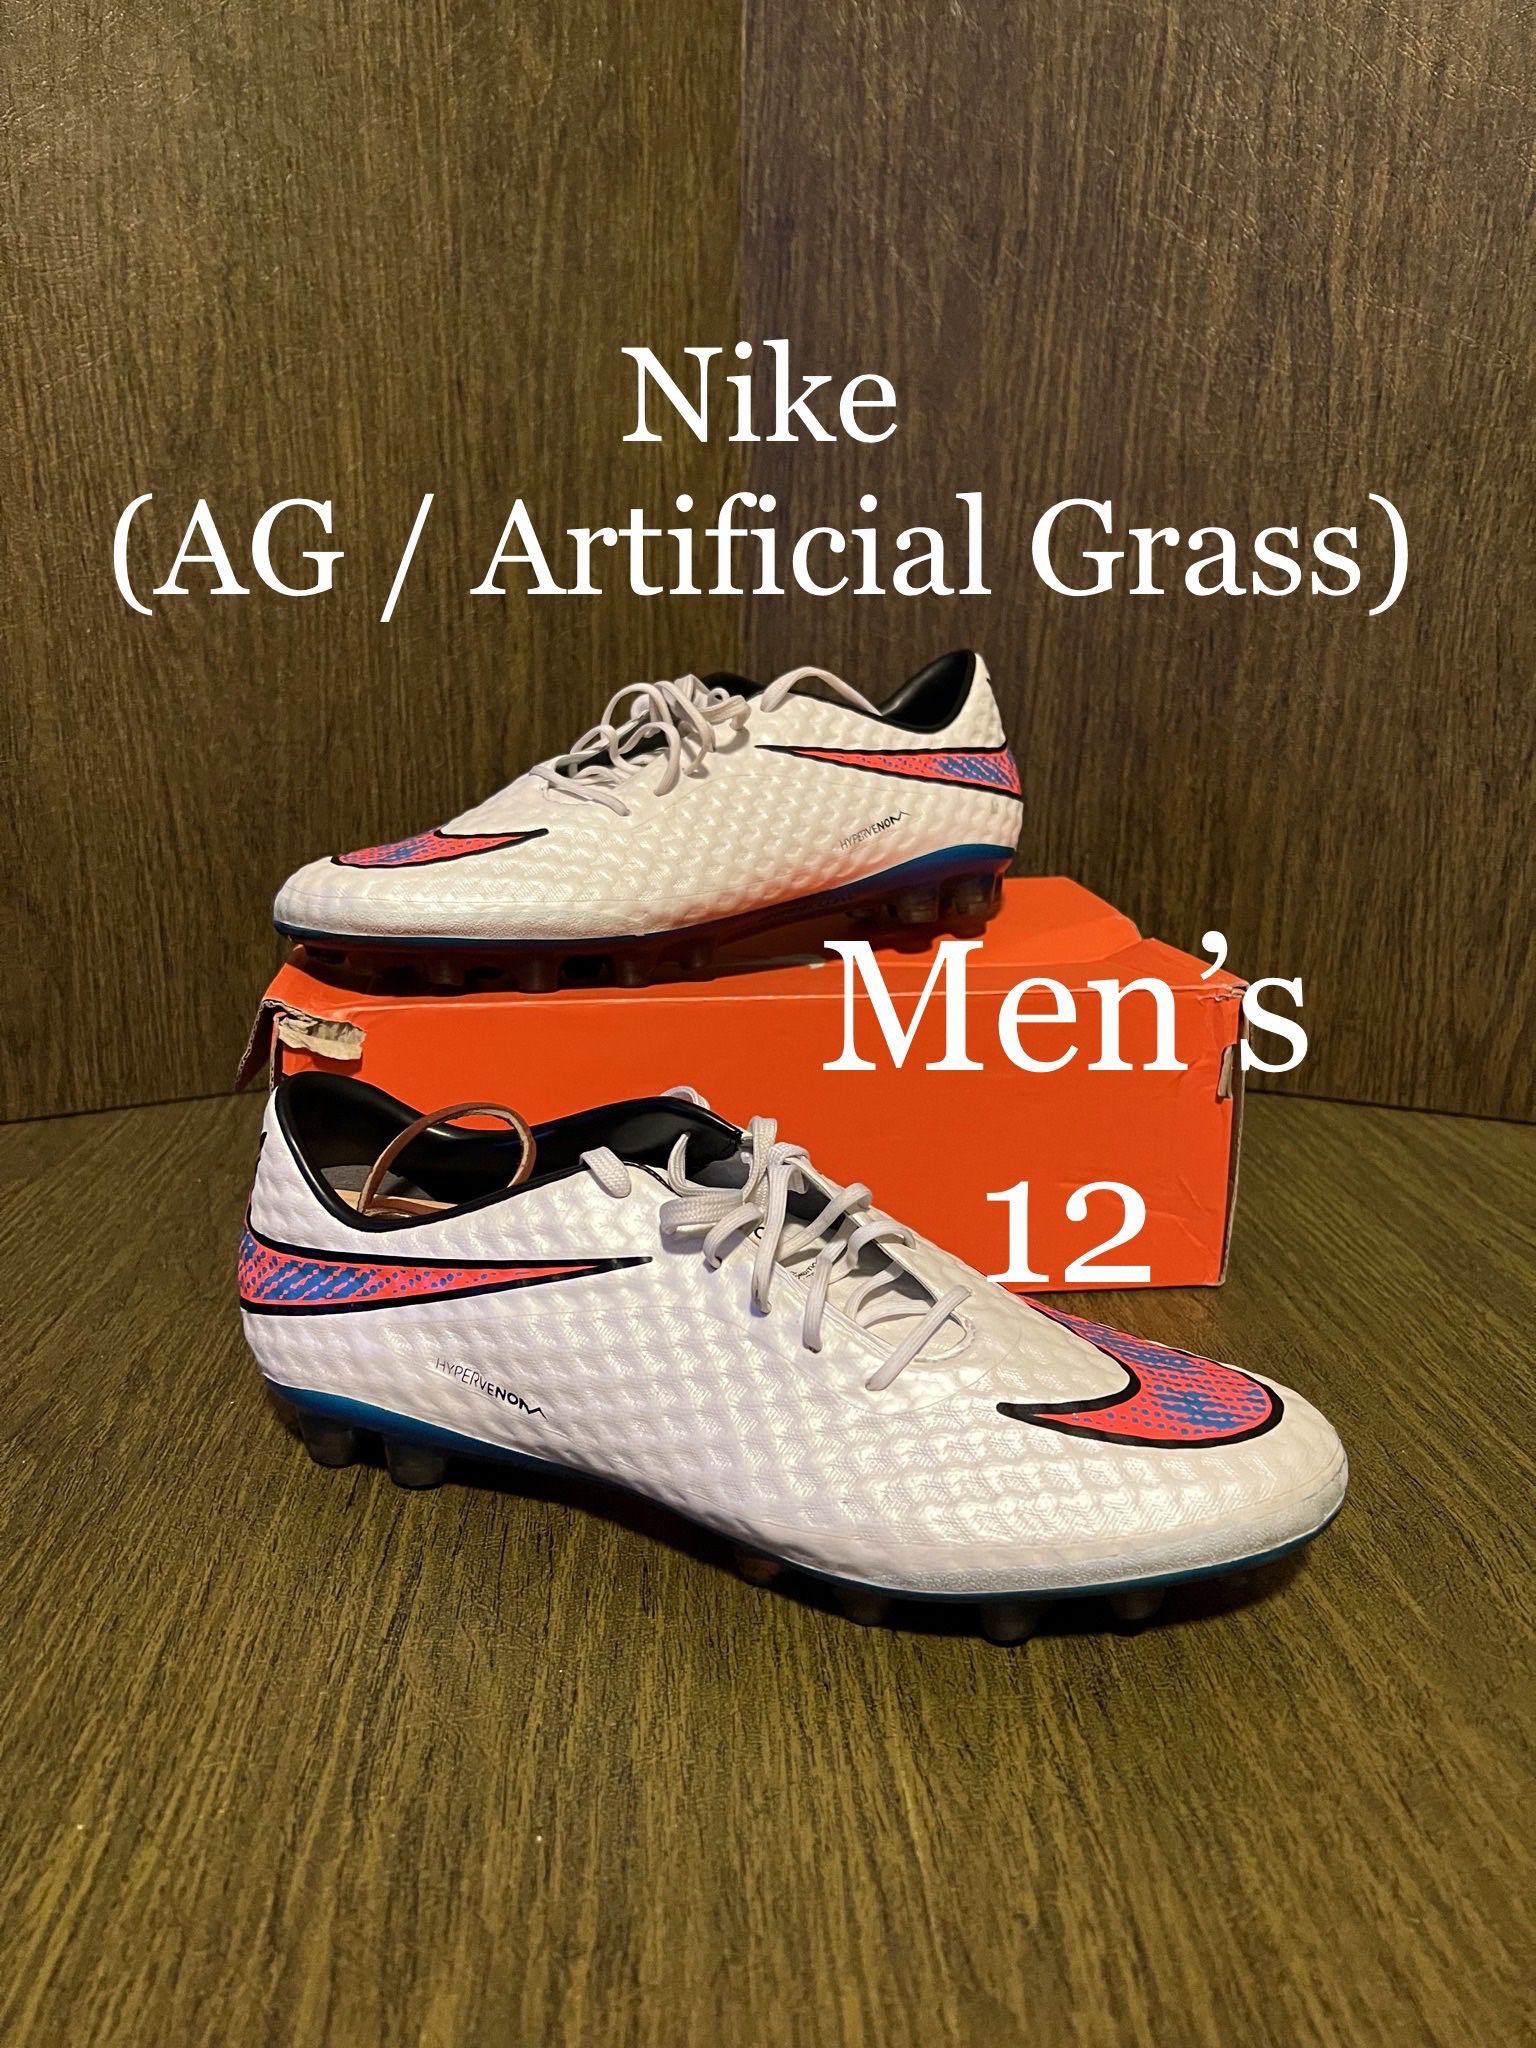 NIKE FC / Hypervenom Phantom AG-R Artificial Turf / / SOCCER Football Boots Cleats / Men's 12 / Like New w/ Box!! Worn 1x / Pearl for Sale in Kent, - OfferUp